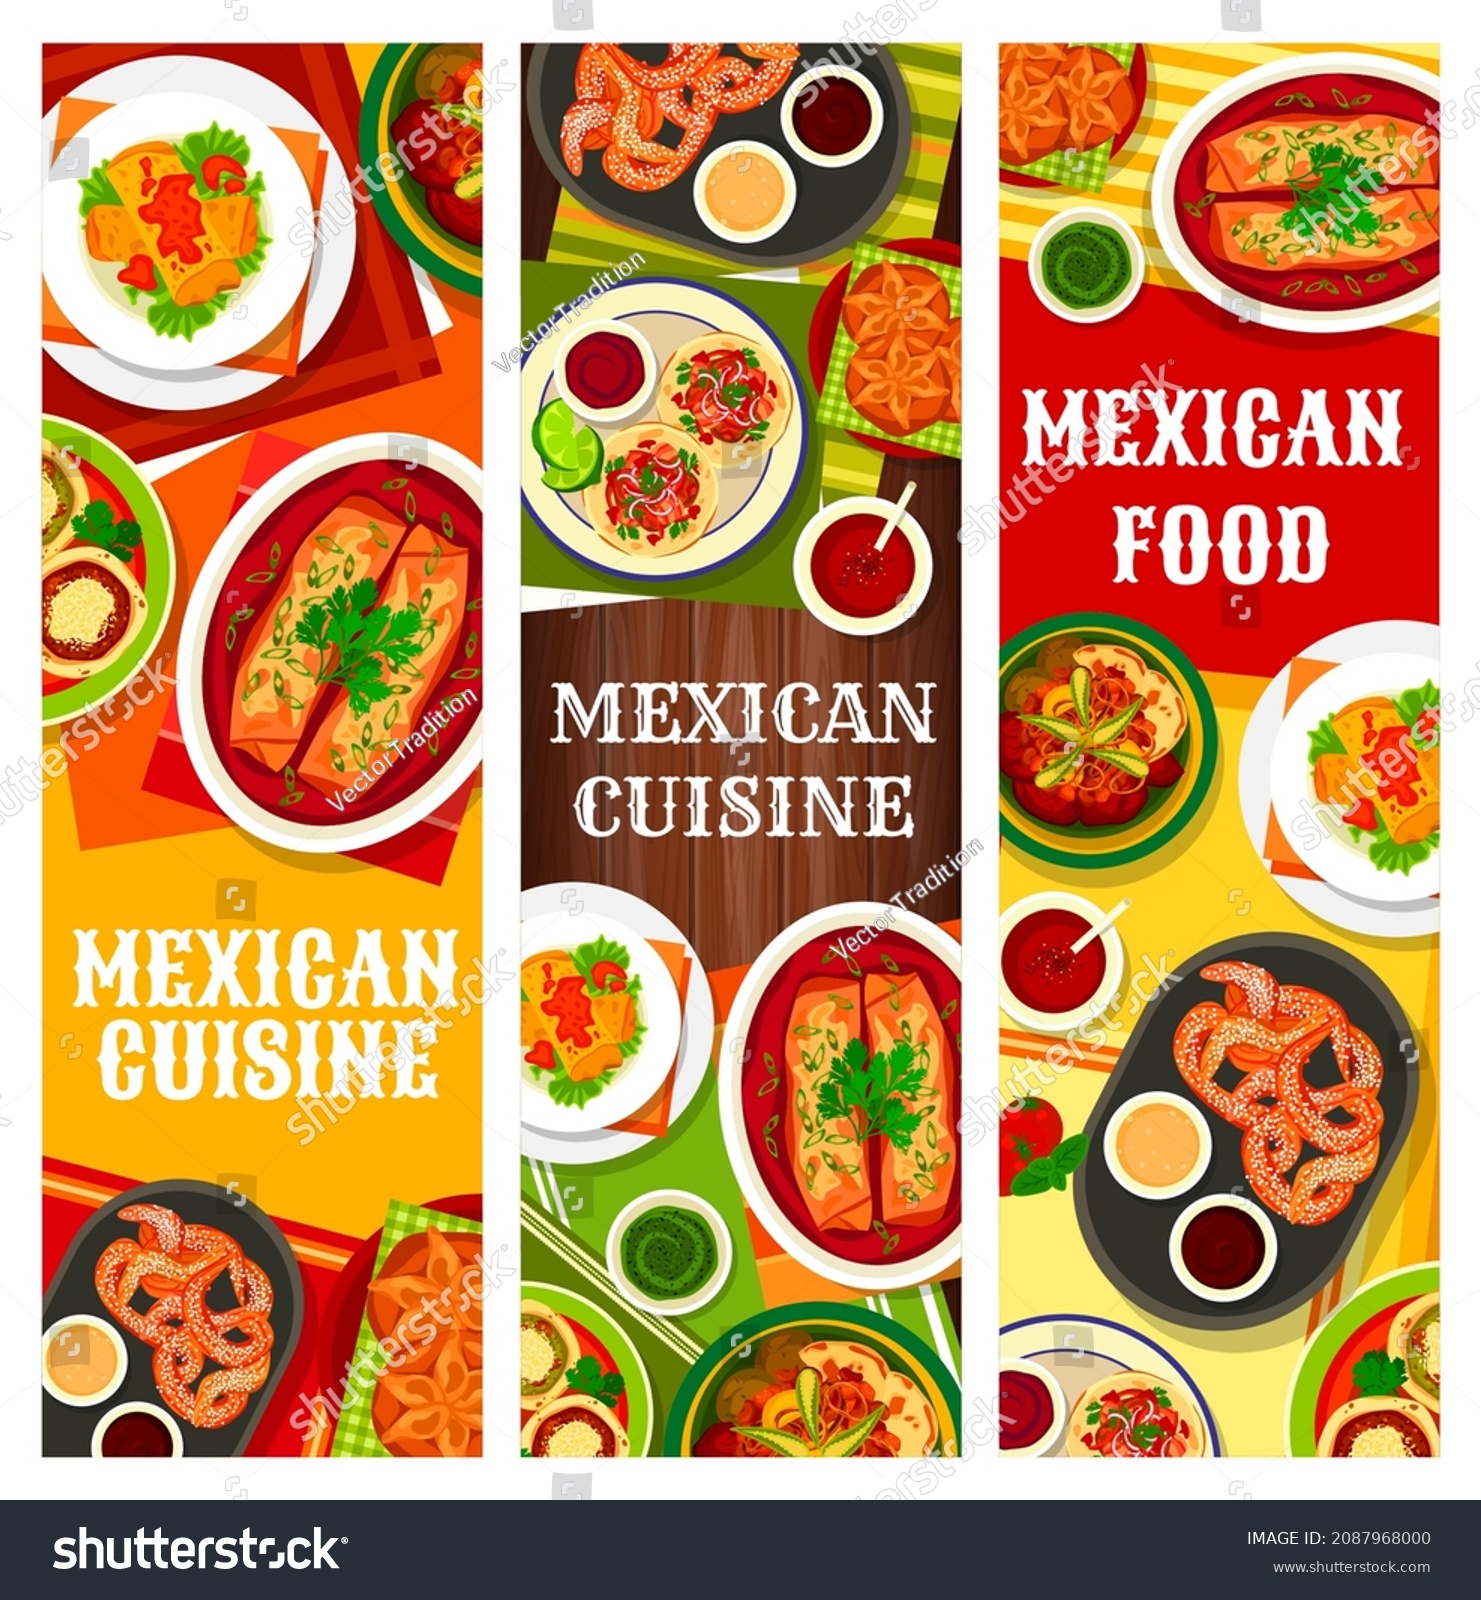 SVG of Mexican cuisine food banners, Mexico dishes menu of traditional dinner and lunch meals. Latin America cuisines, Mexican national food dishes, tacos, burritos, chicken enchilada and chimichanga svg